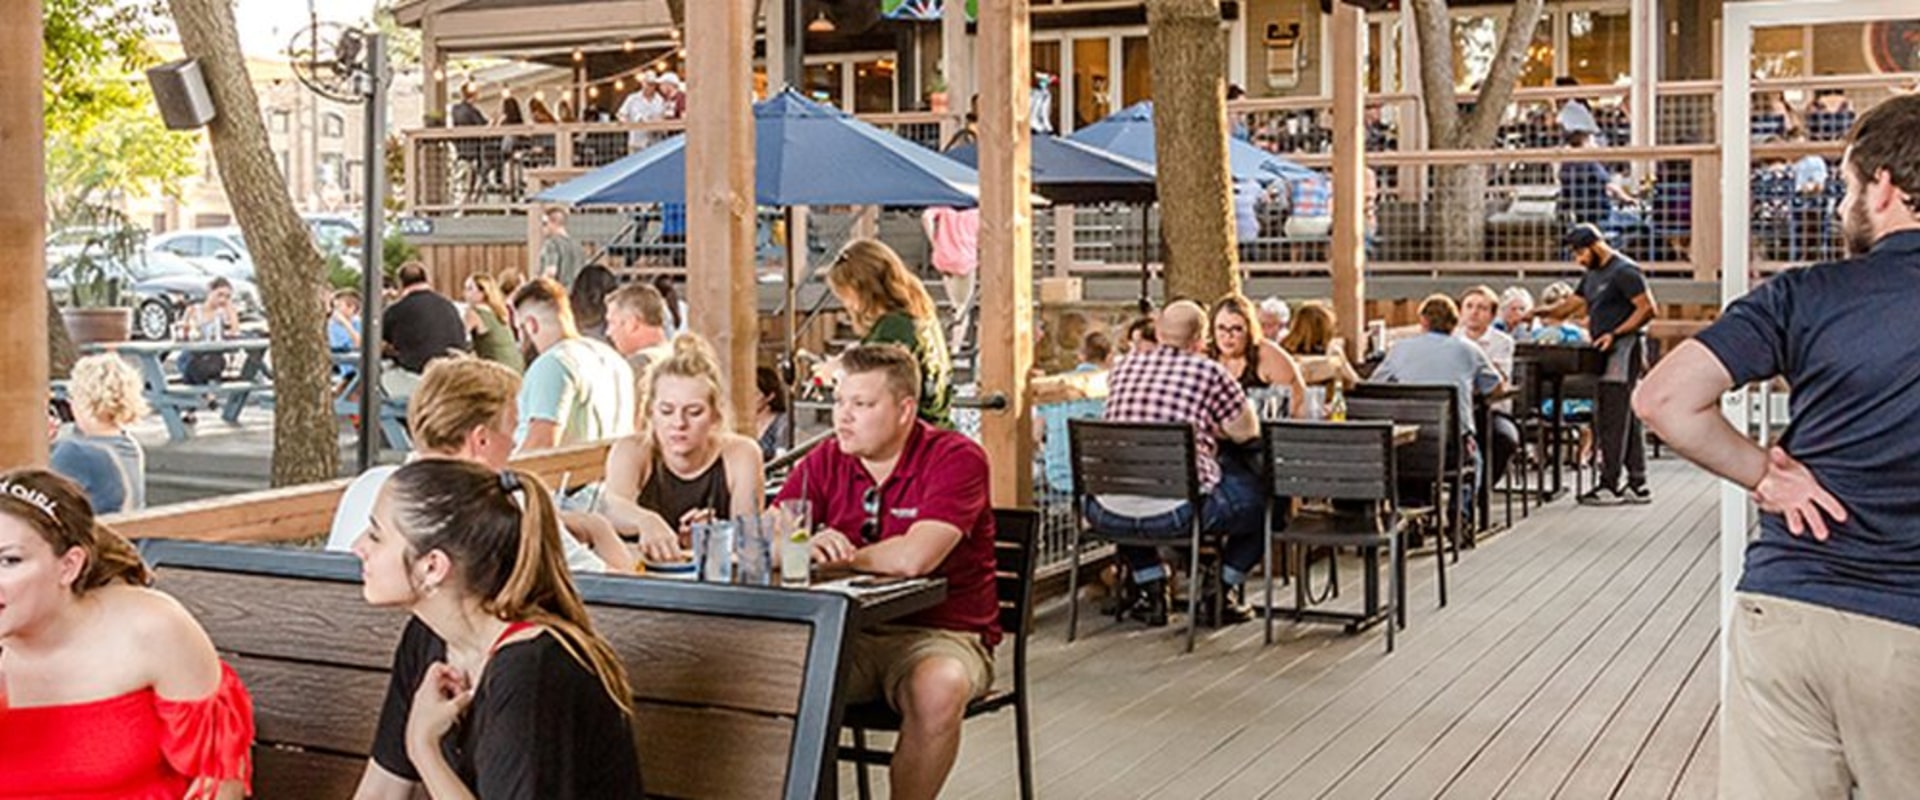 Breweries in Rockwall, TX: A Guide to Outdoor Seating